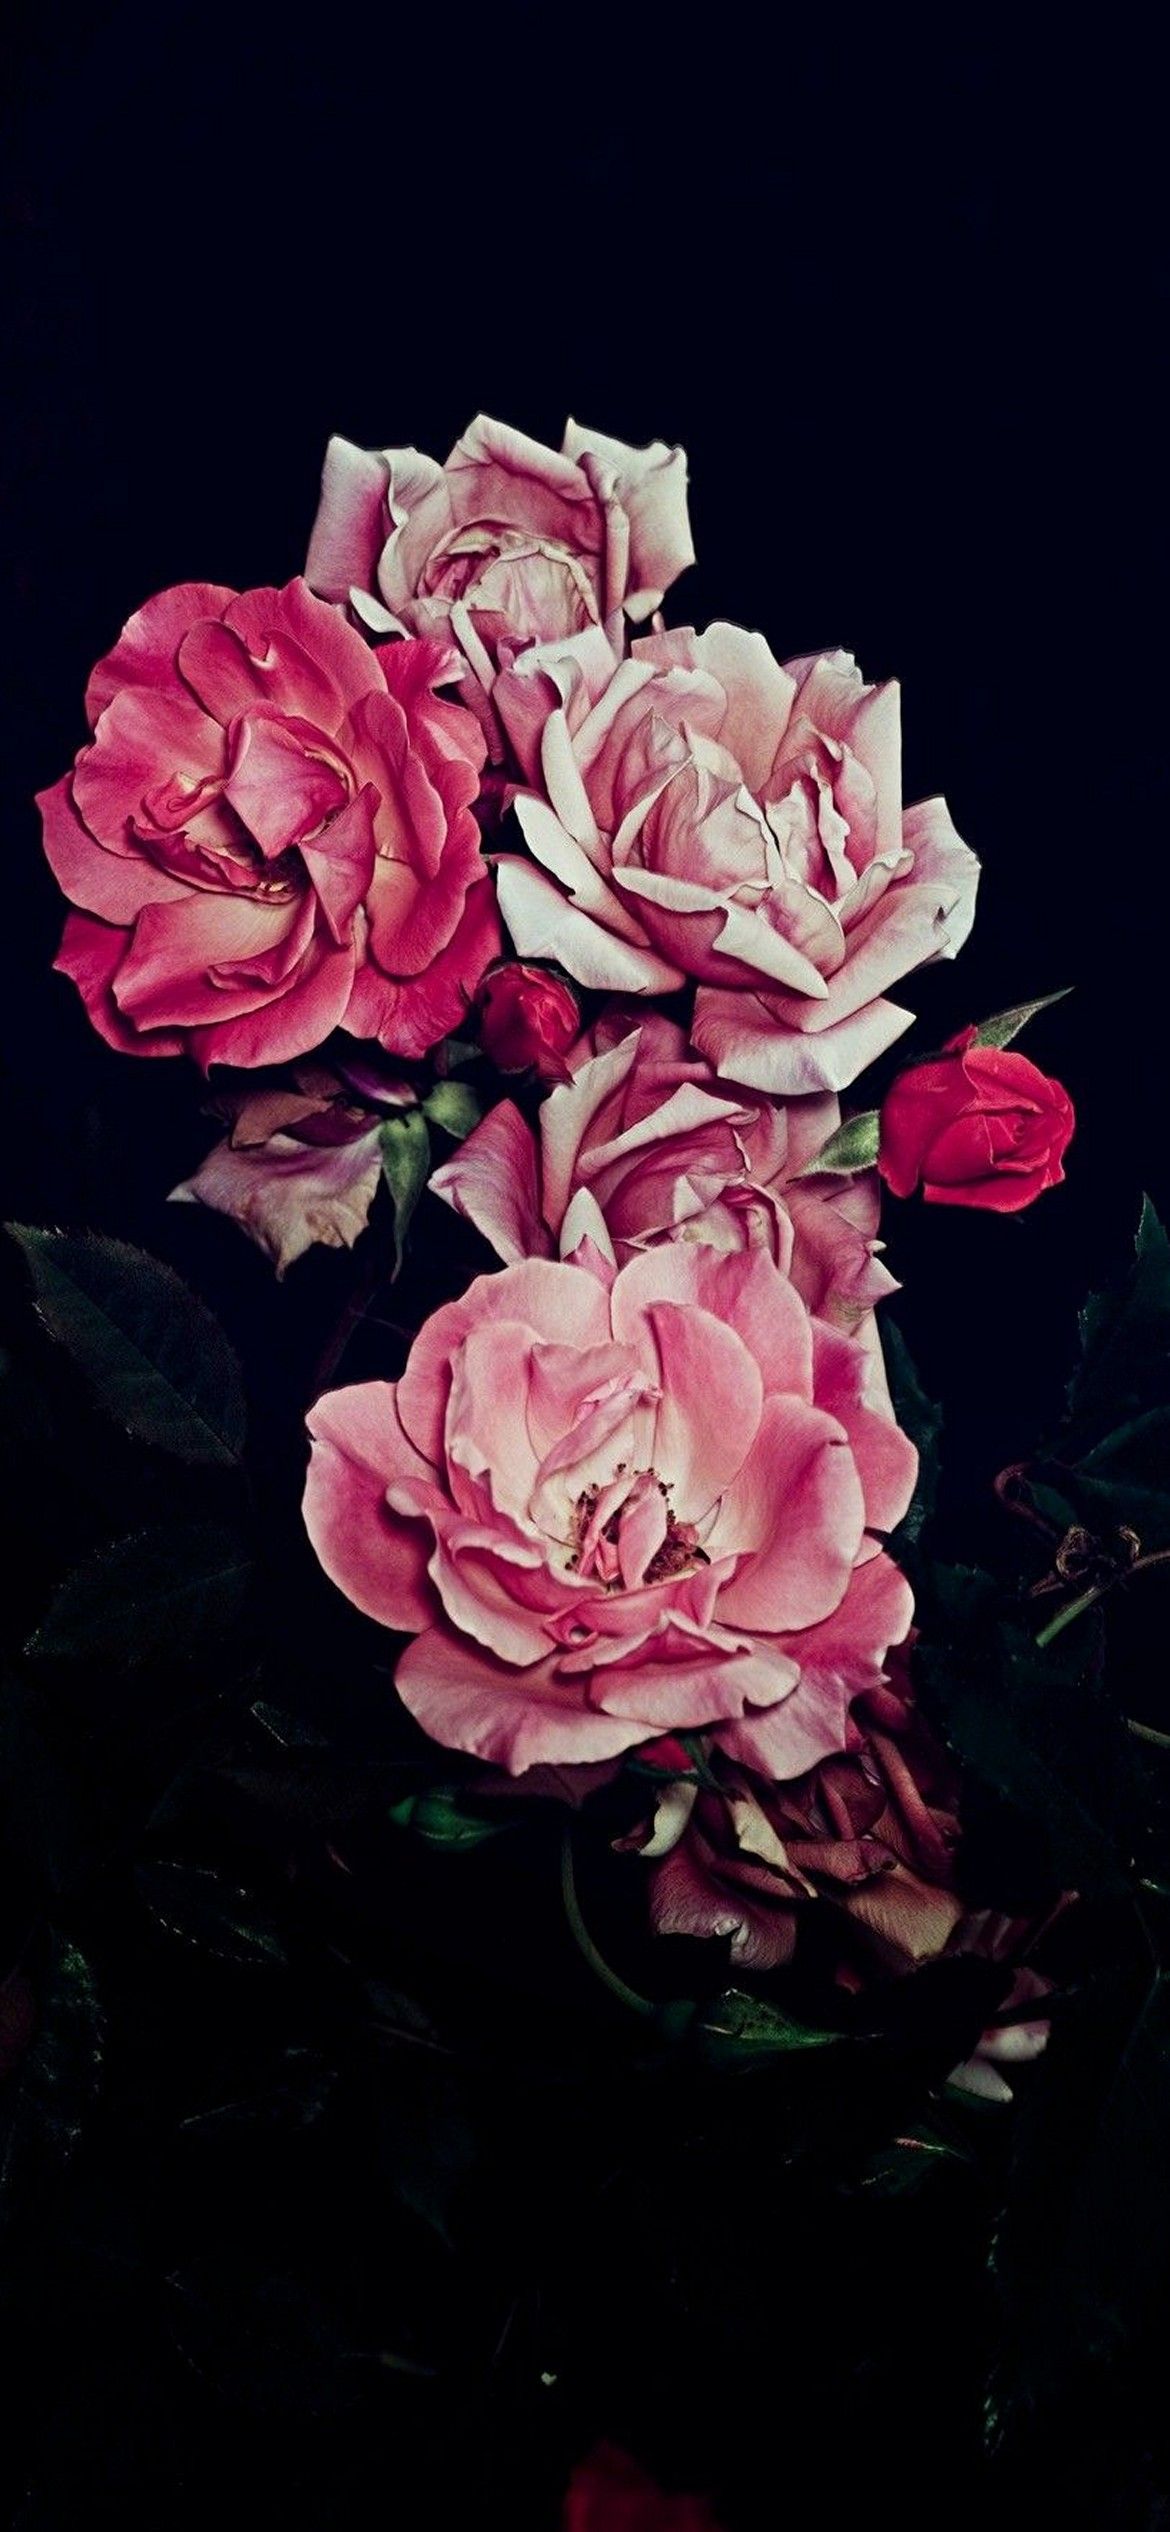 IPhone wallpaper of a bouquet of pink roses on a black background - Roses